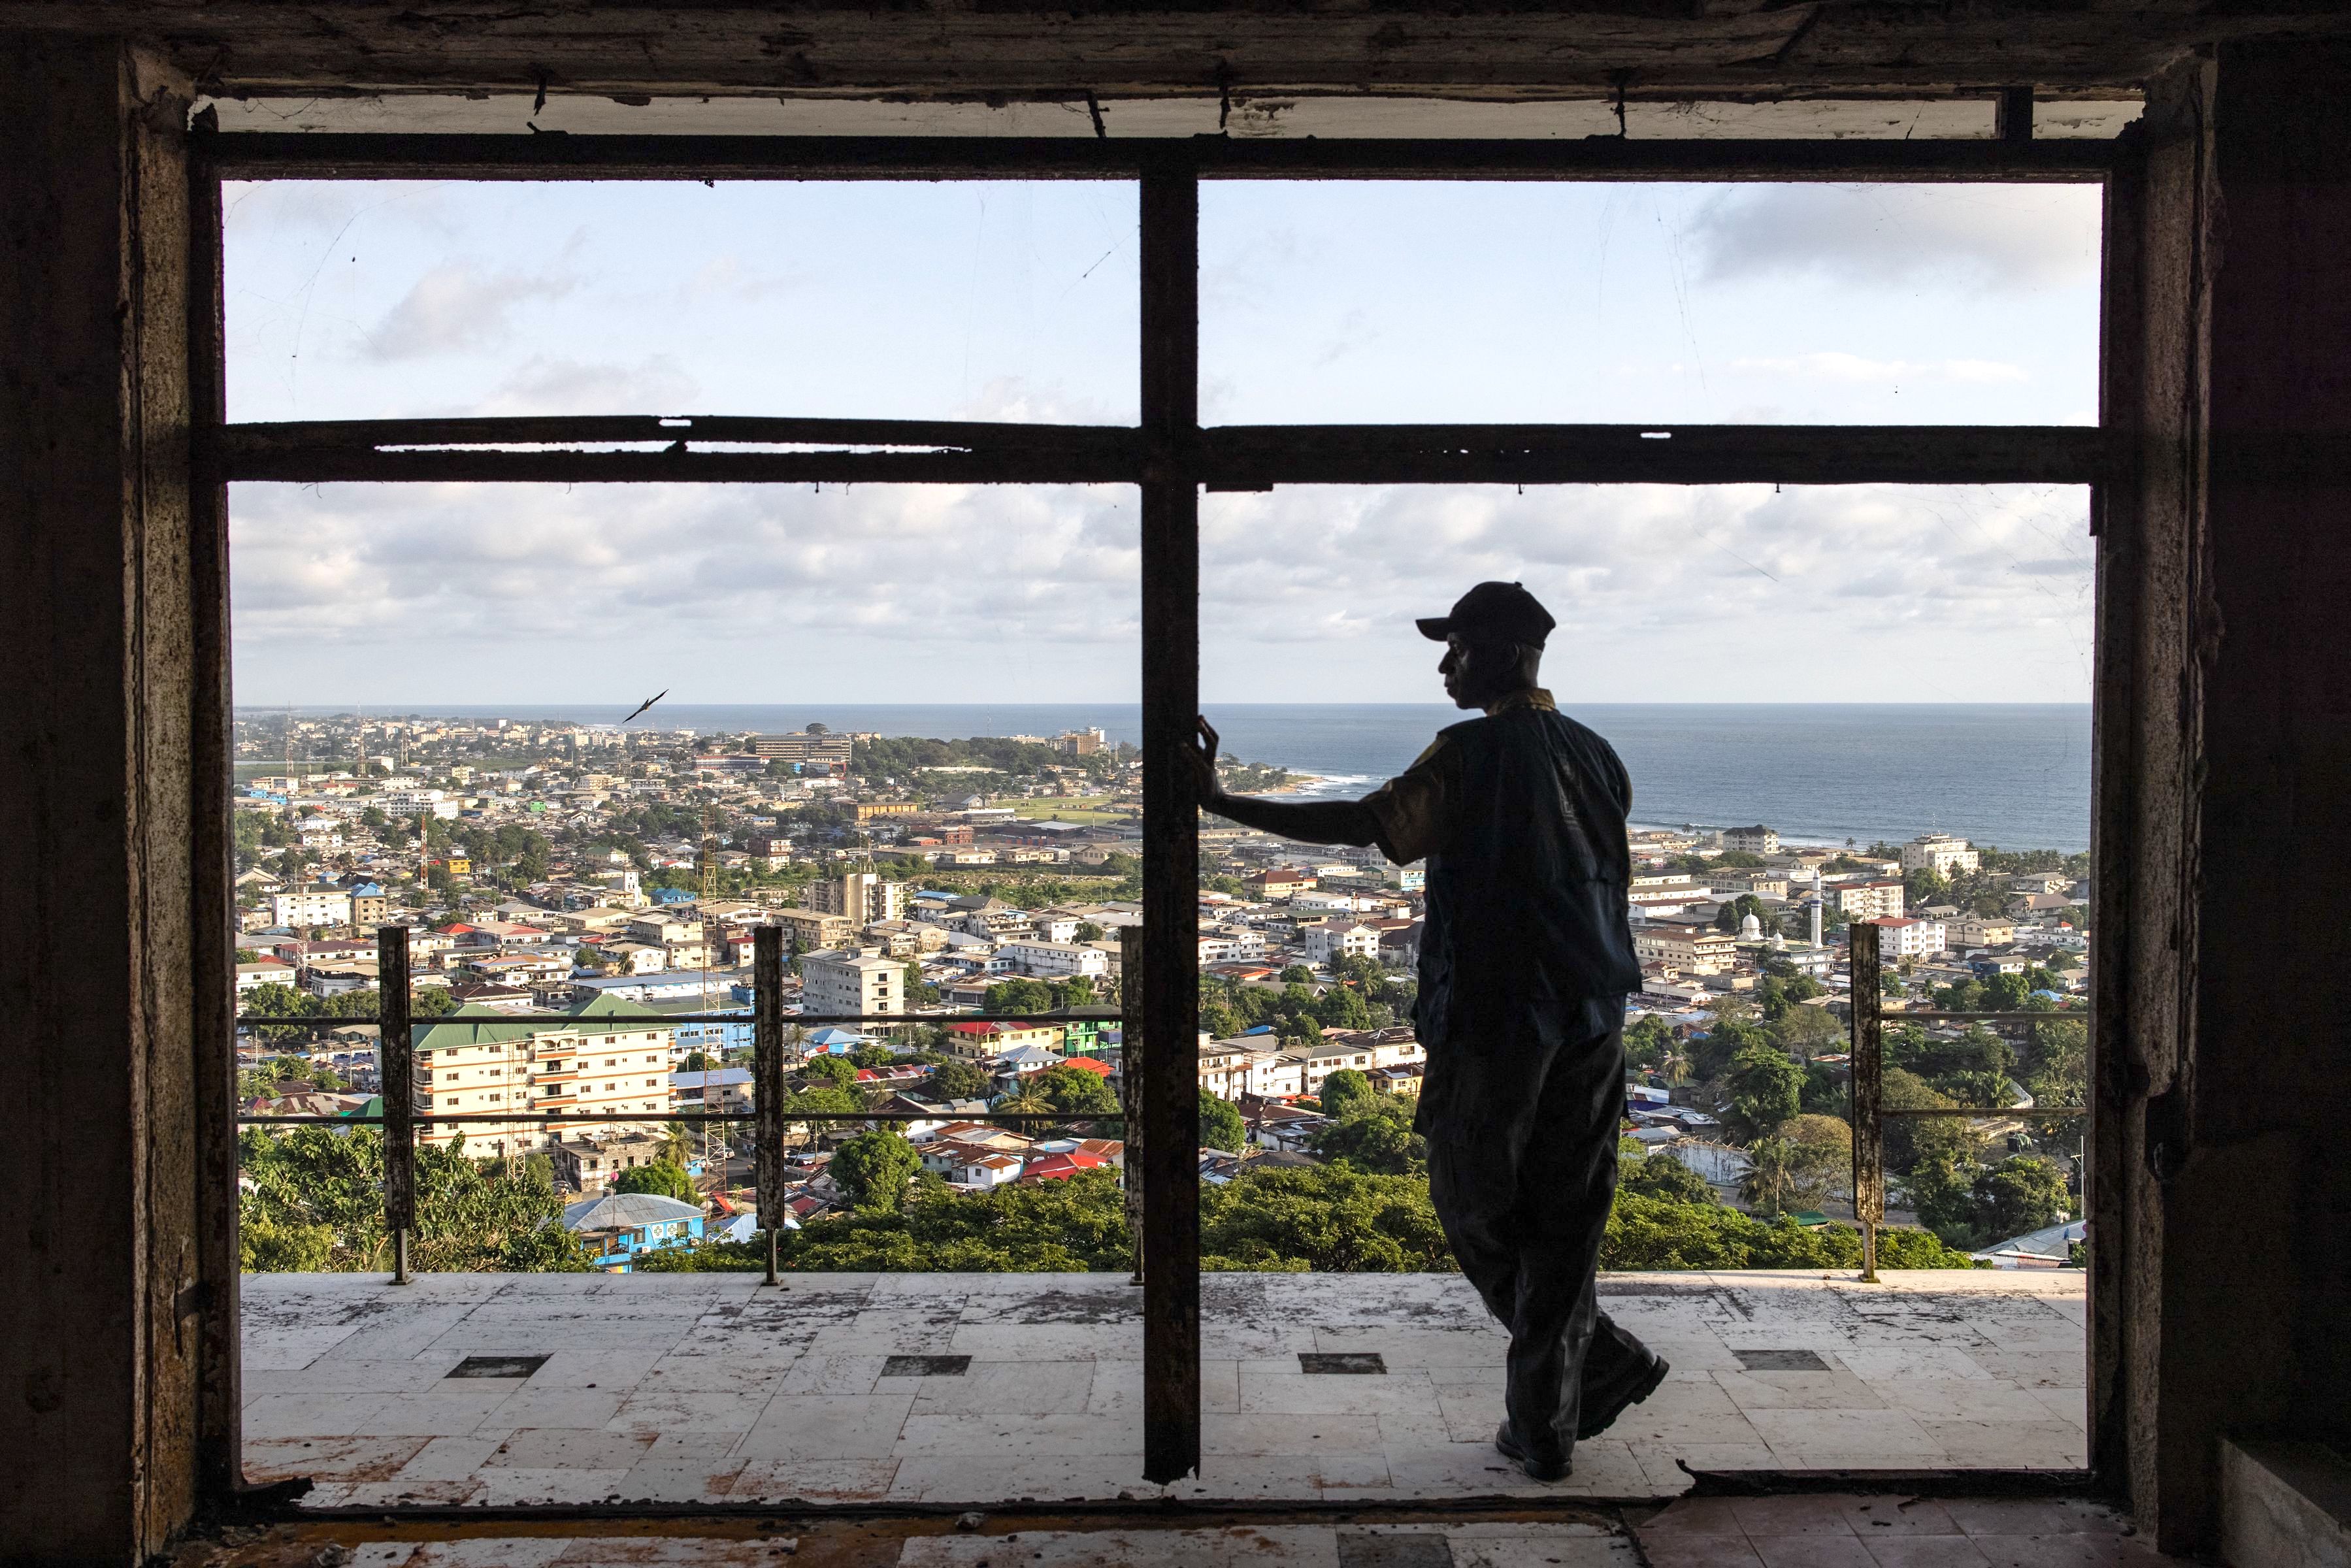 A person standing in the balcony opening of a derelict hotel overlooking a coastal city.